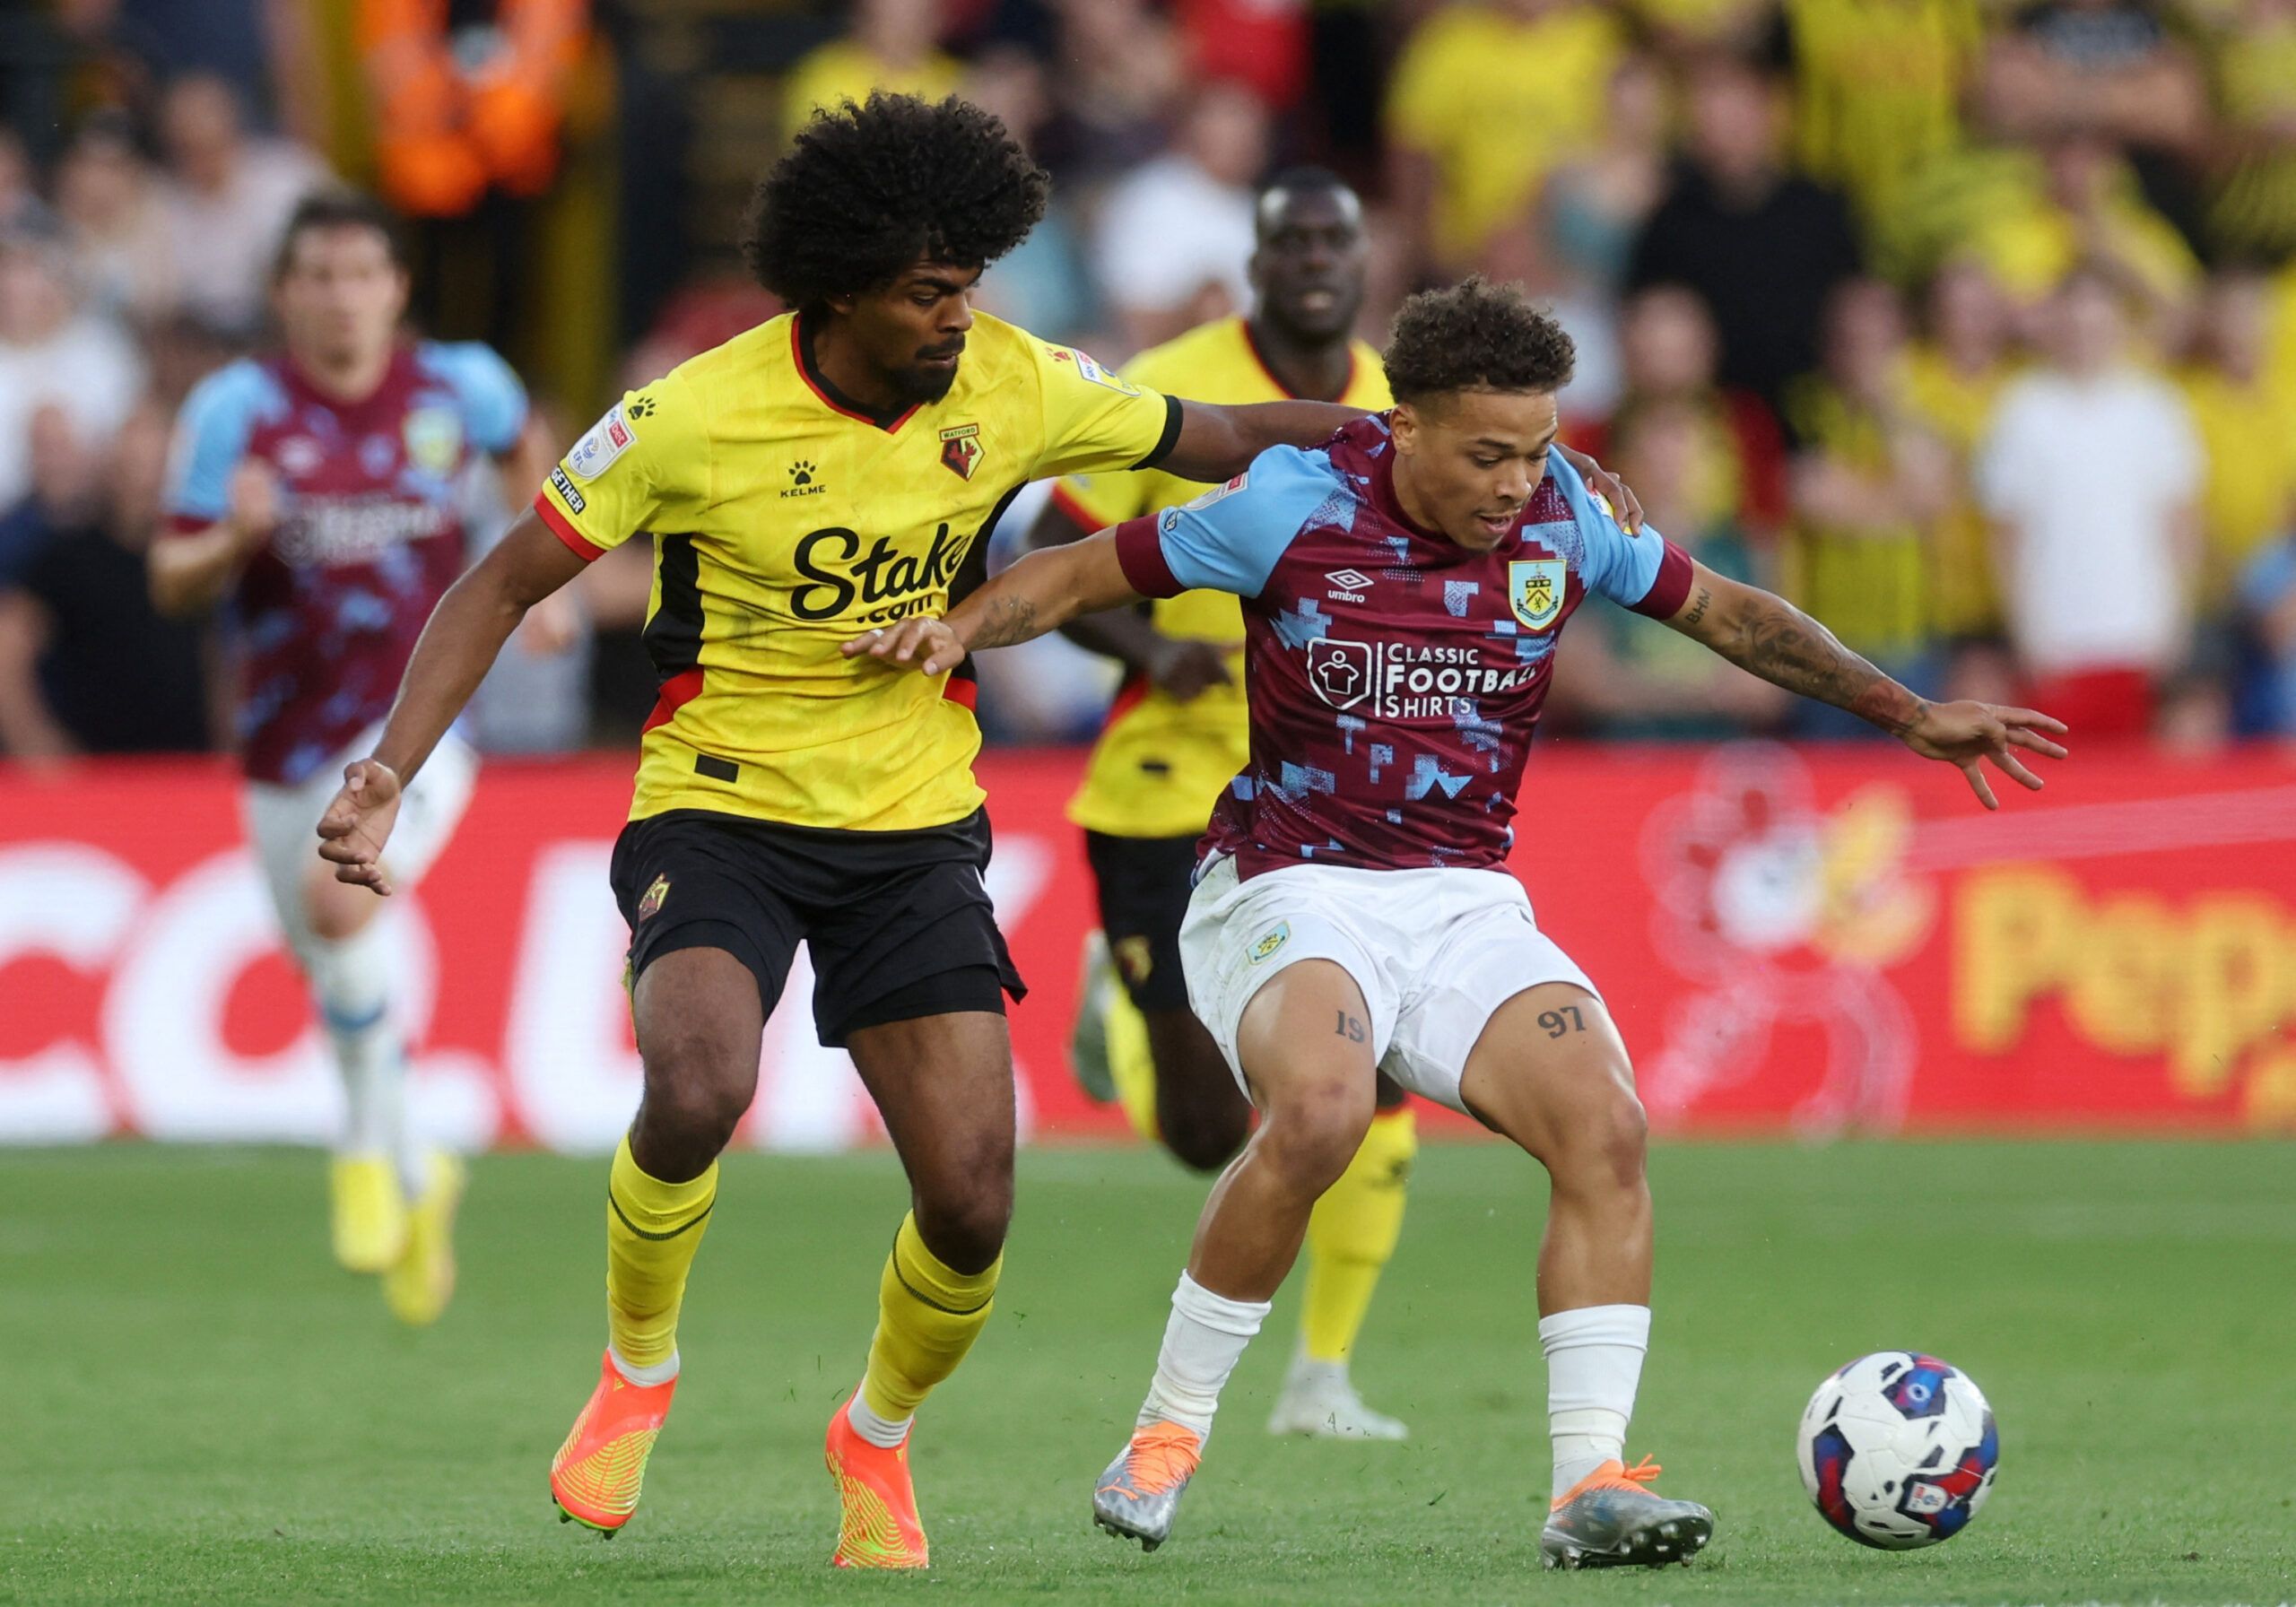 Soccer Football - Championship - Watford v Burnley - Vicarage Road, Watford, Britain - August 12, 2022 Watford's Hamza Choudhury in action with Burnley's Manuel Benson  EDITORIAL USE ONLY. No use with unauthorized audio, video, data, fixture lists, club/league logos or 